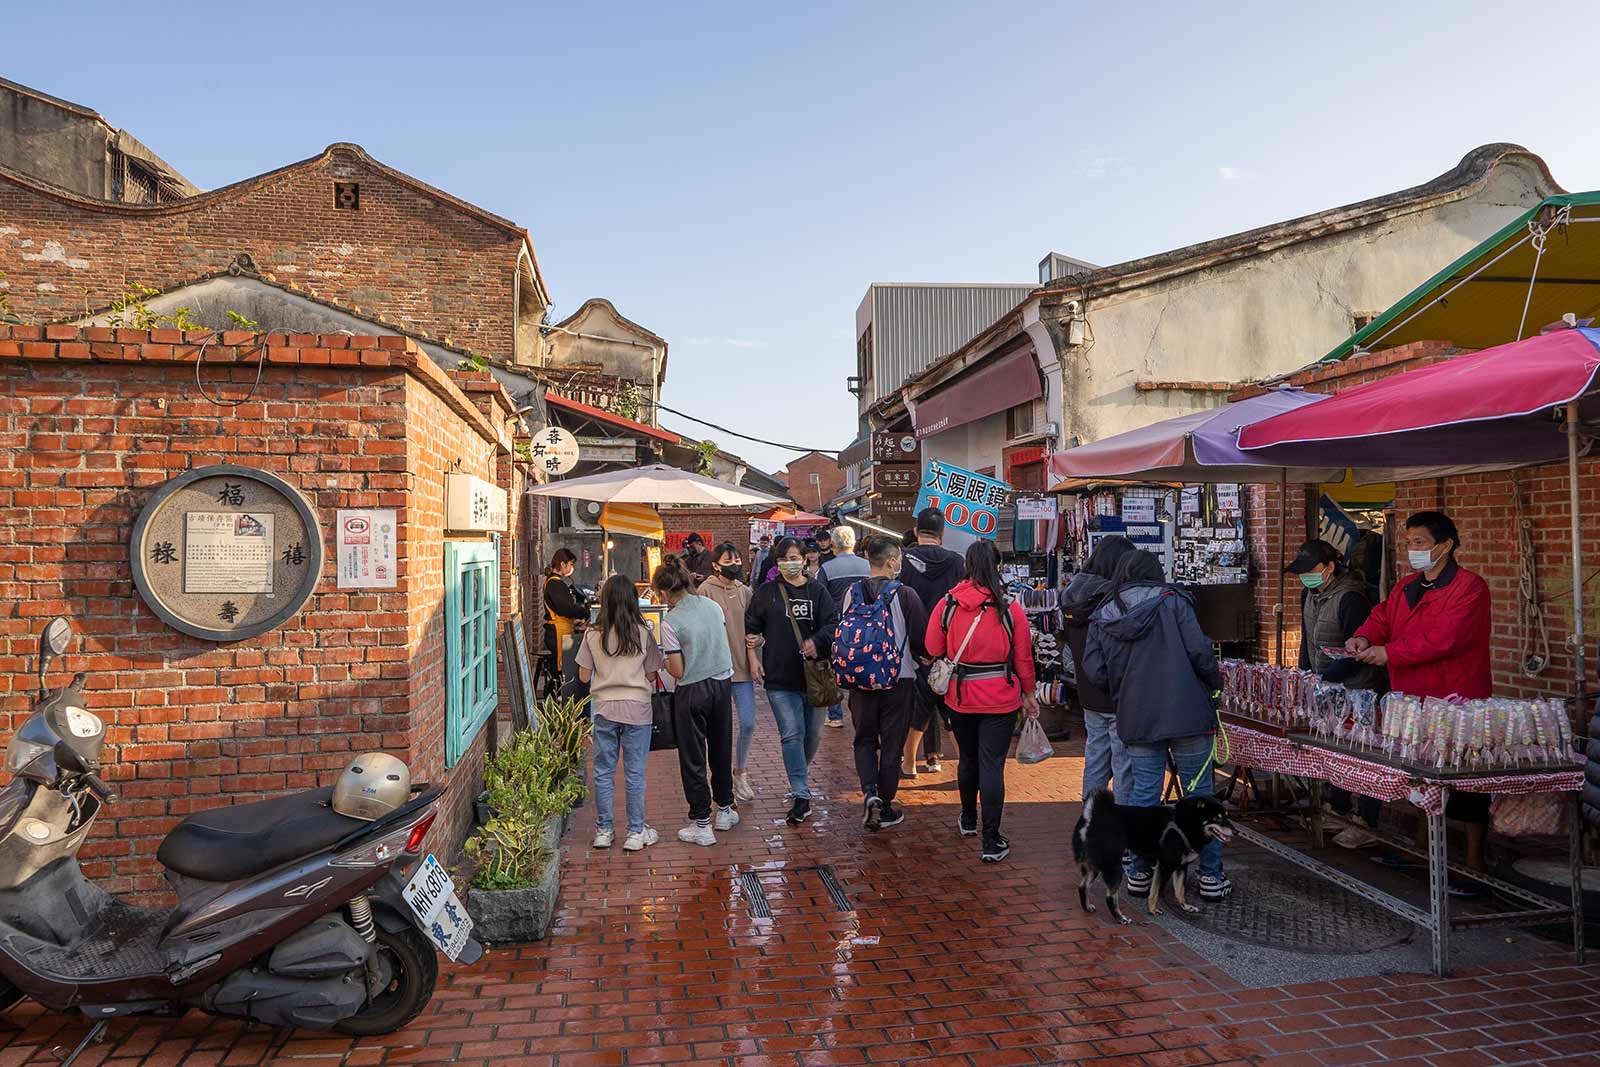 Tourists walk between stalls in one of Lukang's red-brick-covered old streets; both the buildings and street are made from bright red bricks.